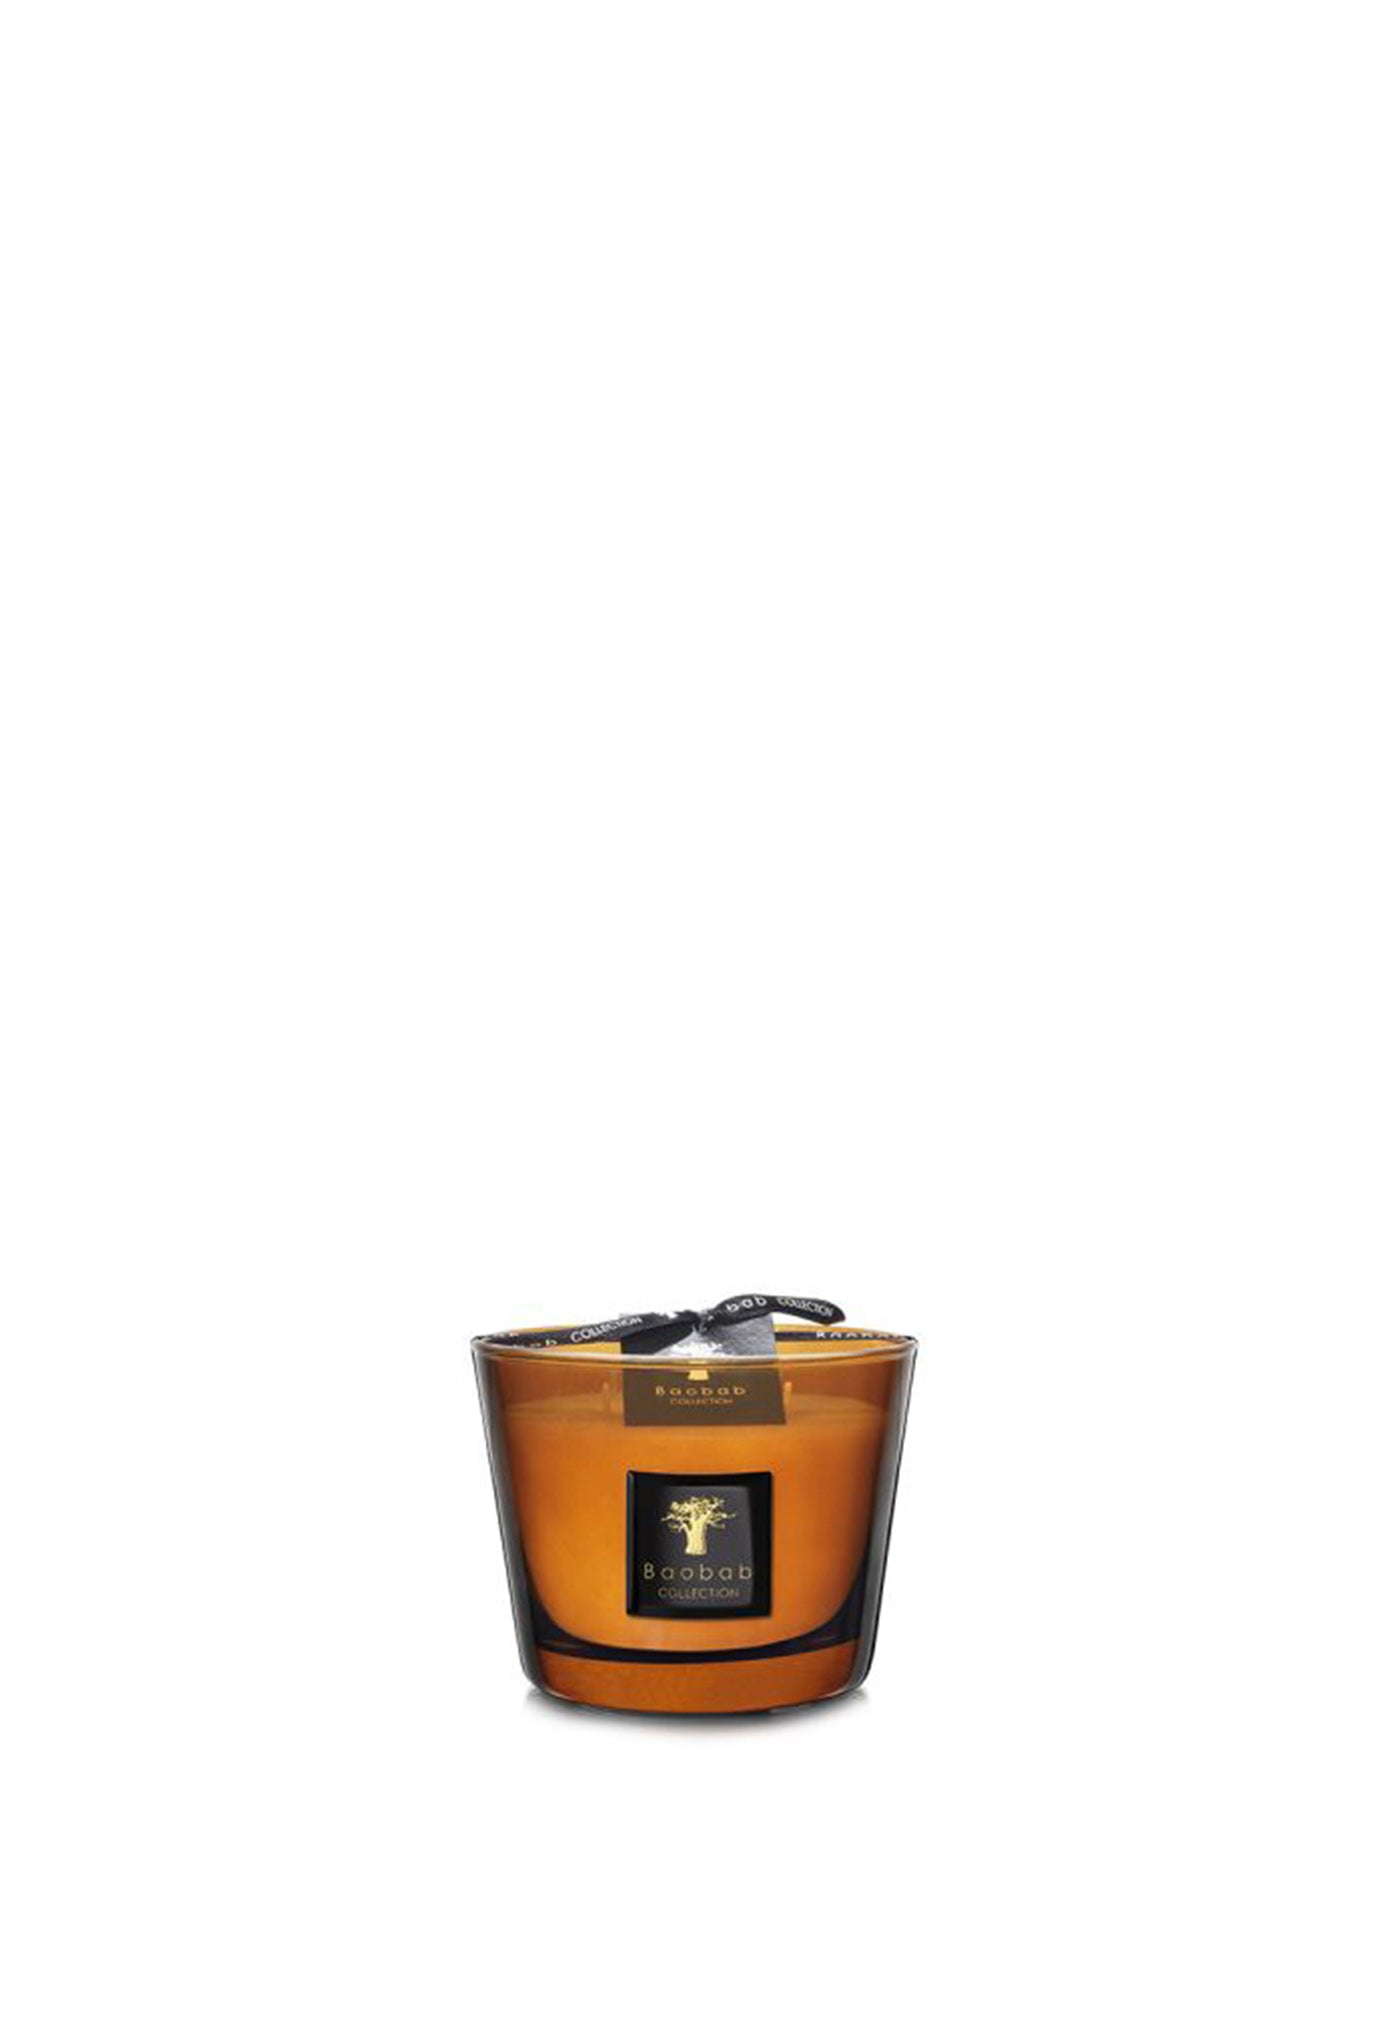 Candle - Cuir de Russie sold by Angel Divine